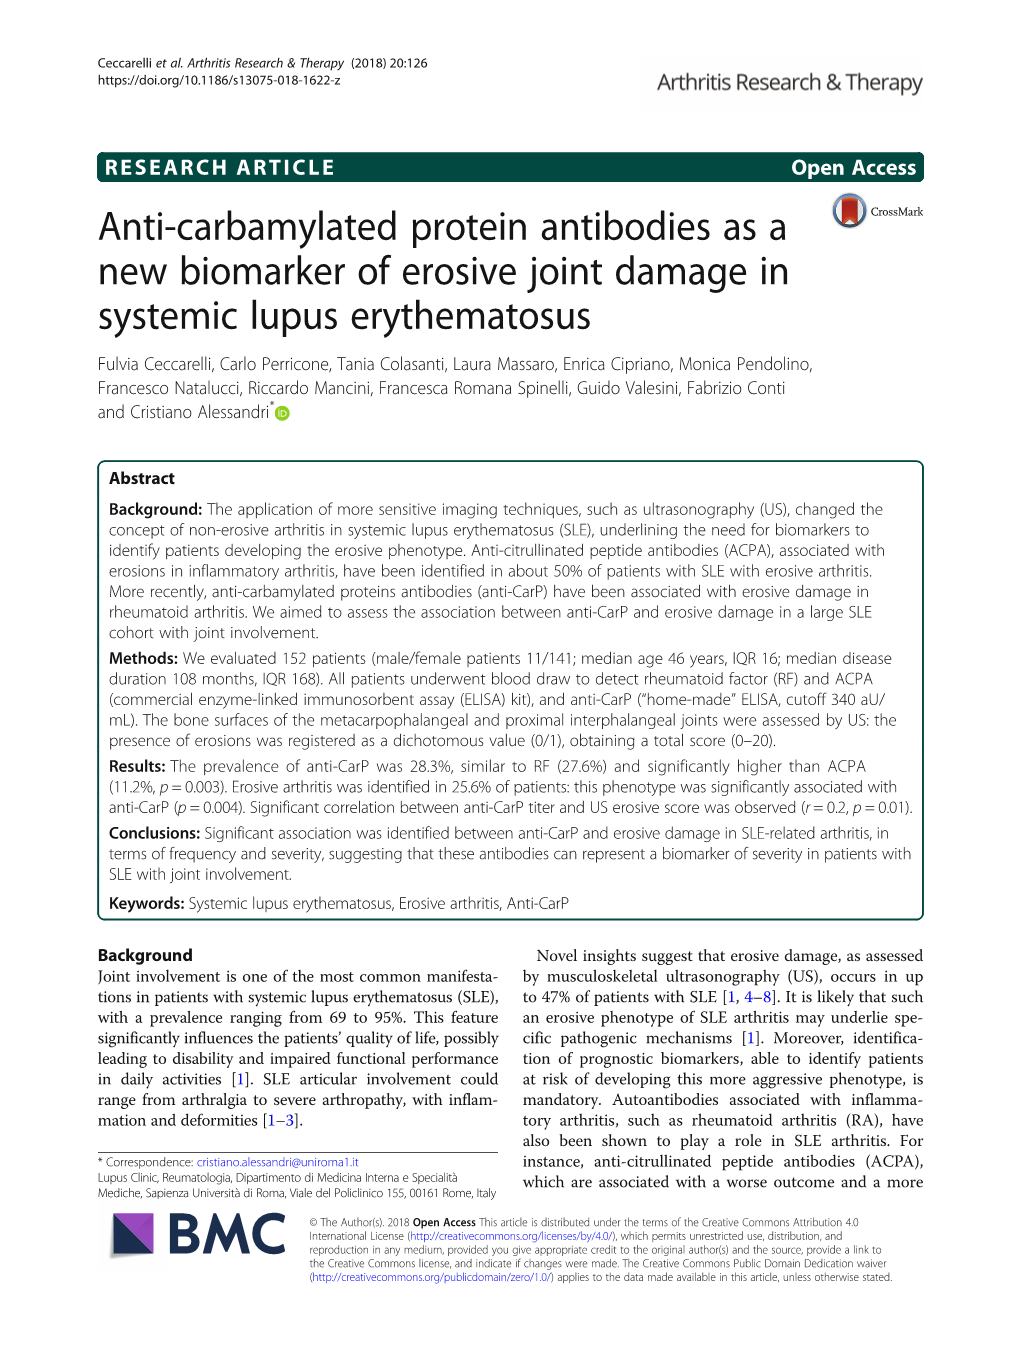 Anti-Carbamylated Protein Antibodies As a New Biomarker of Erosive Joint